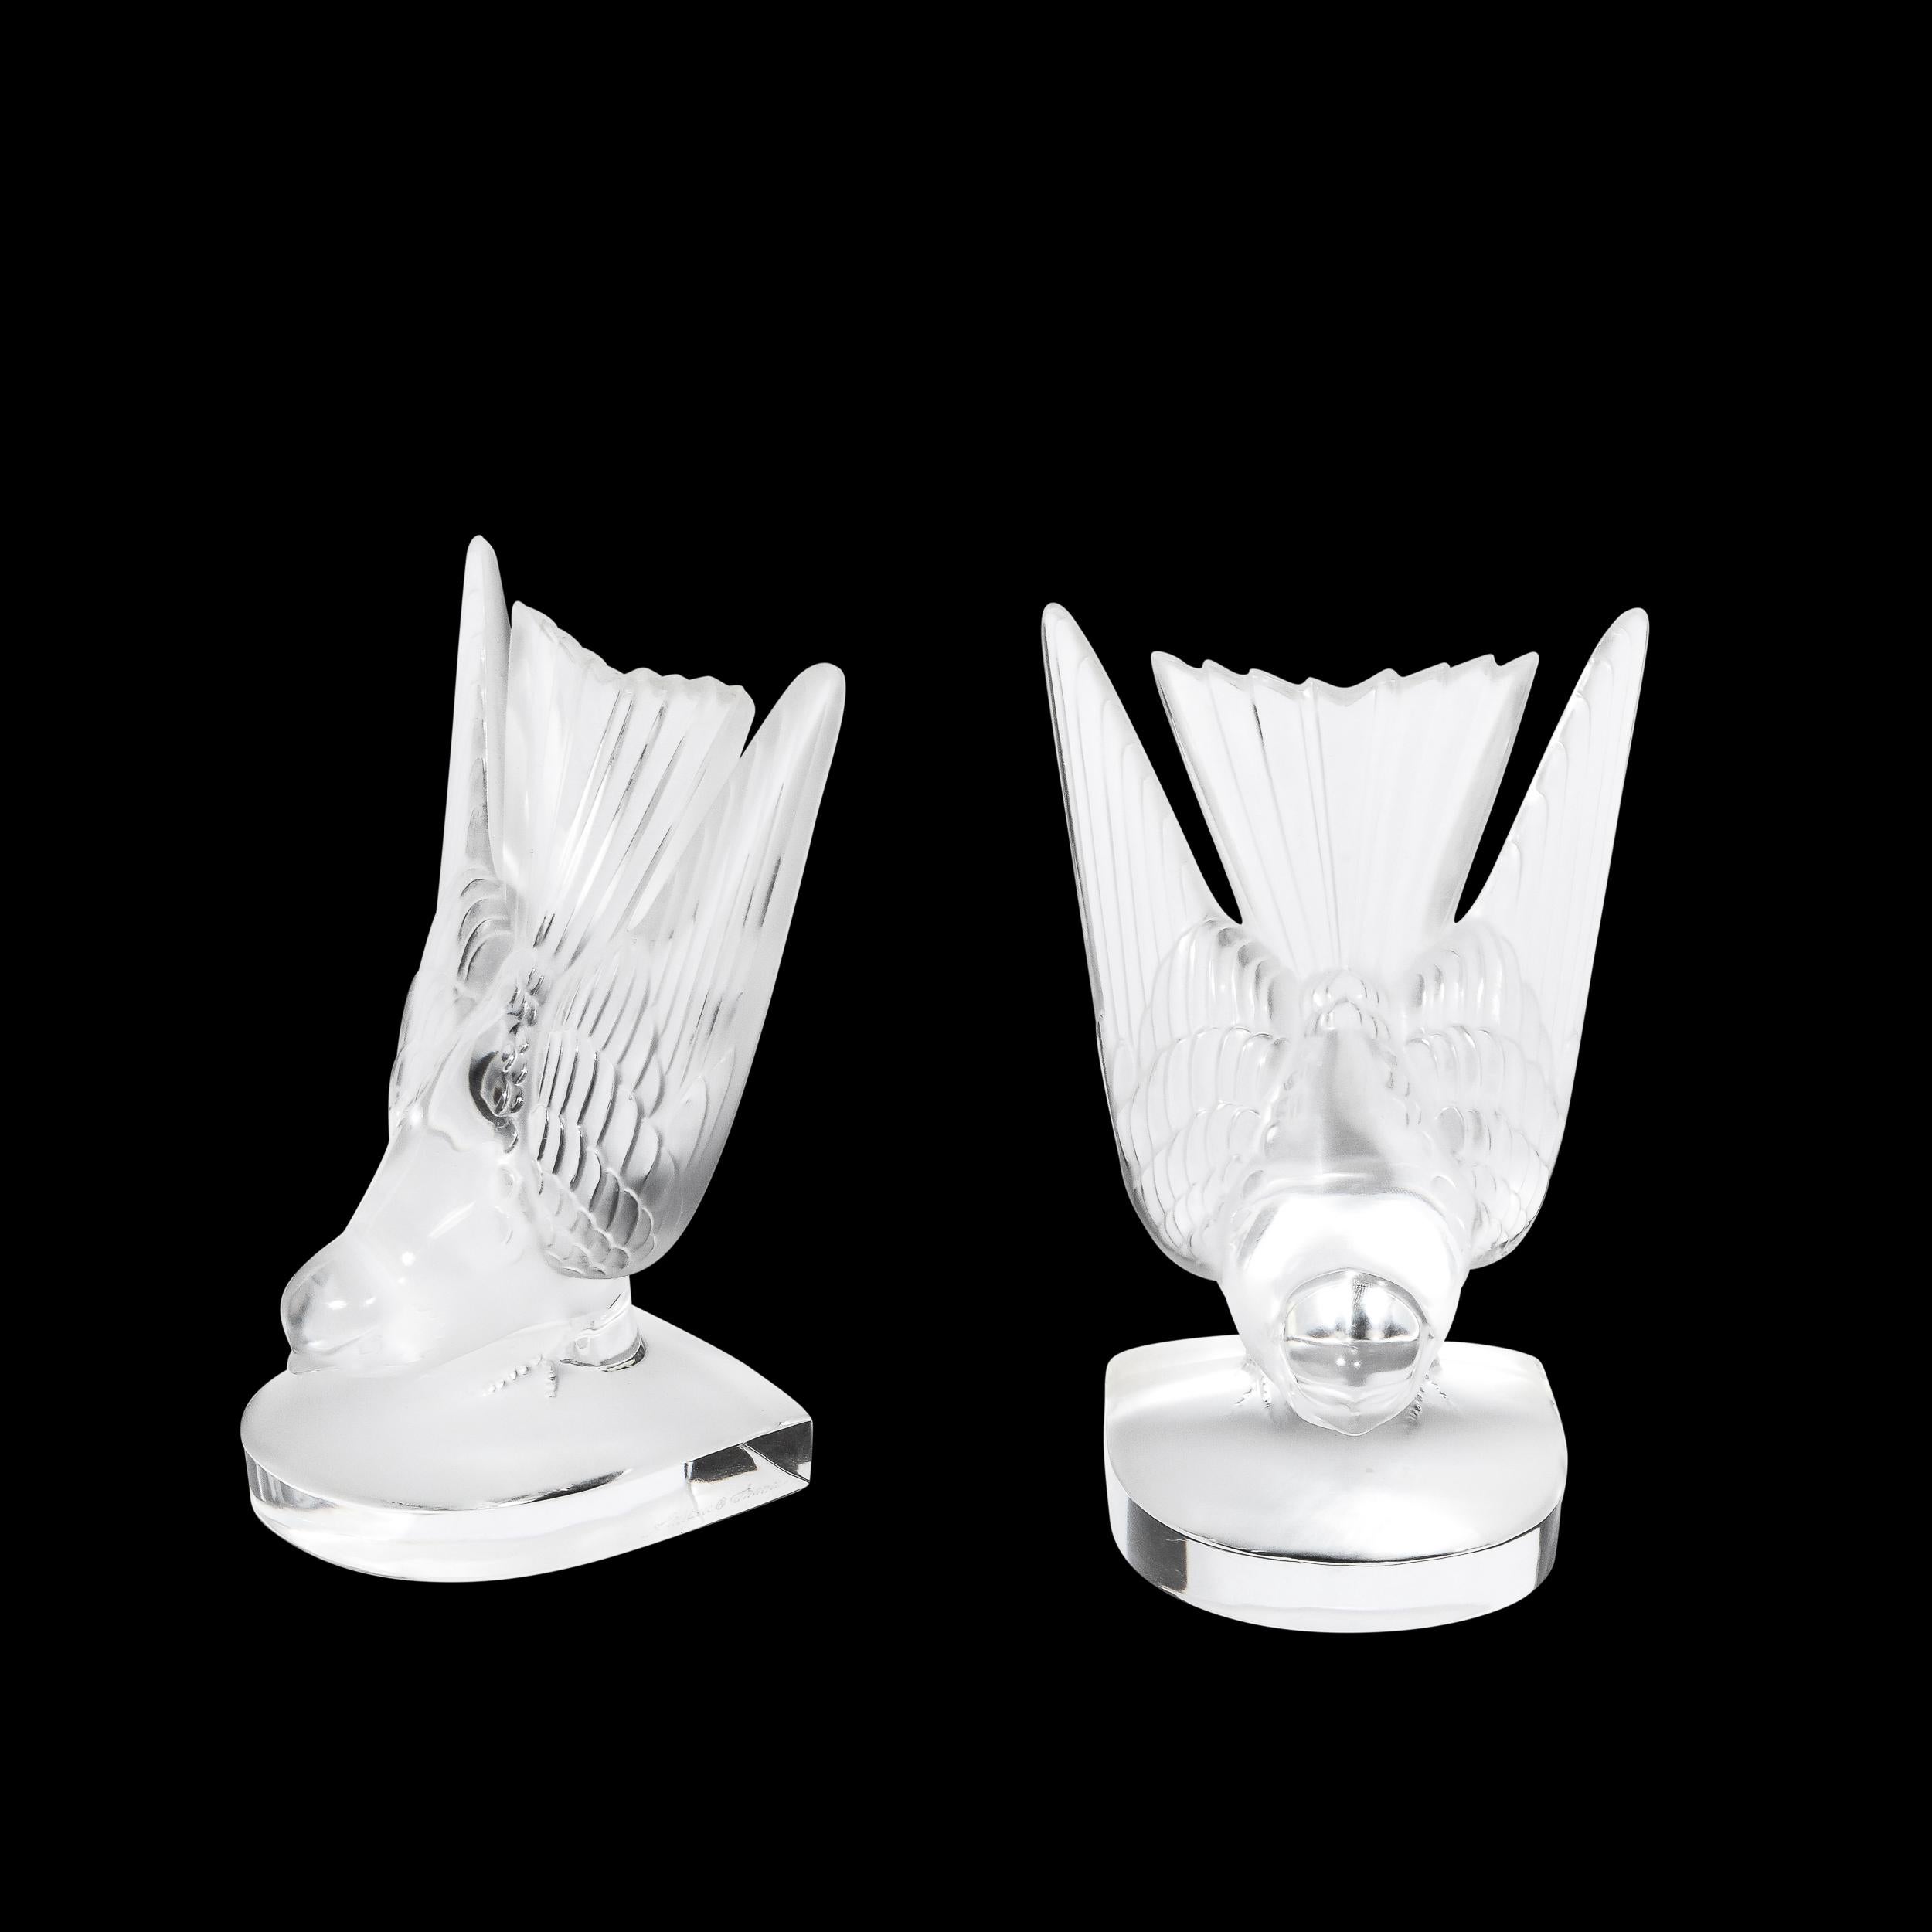 These gorgeous Art Deco Style 'Swallow' Bookends by the esteemed Art Glass Company 'Lalique' originate from France during the latter half of the 20th Century. Featuring truly elegant stability and beautiful design throughout, the Swallow Bookends